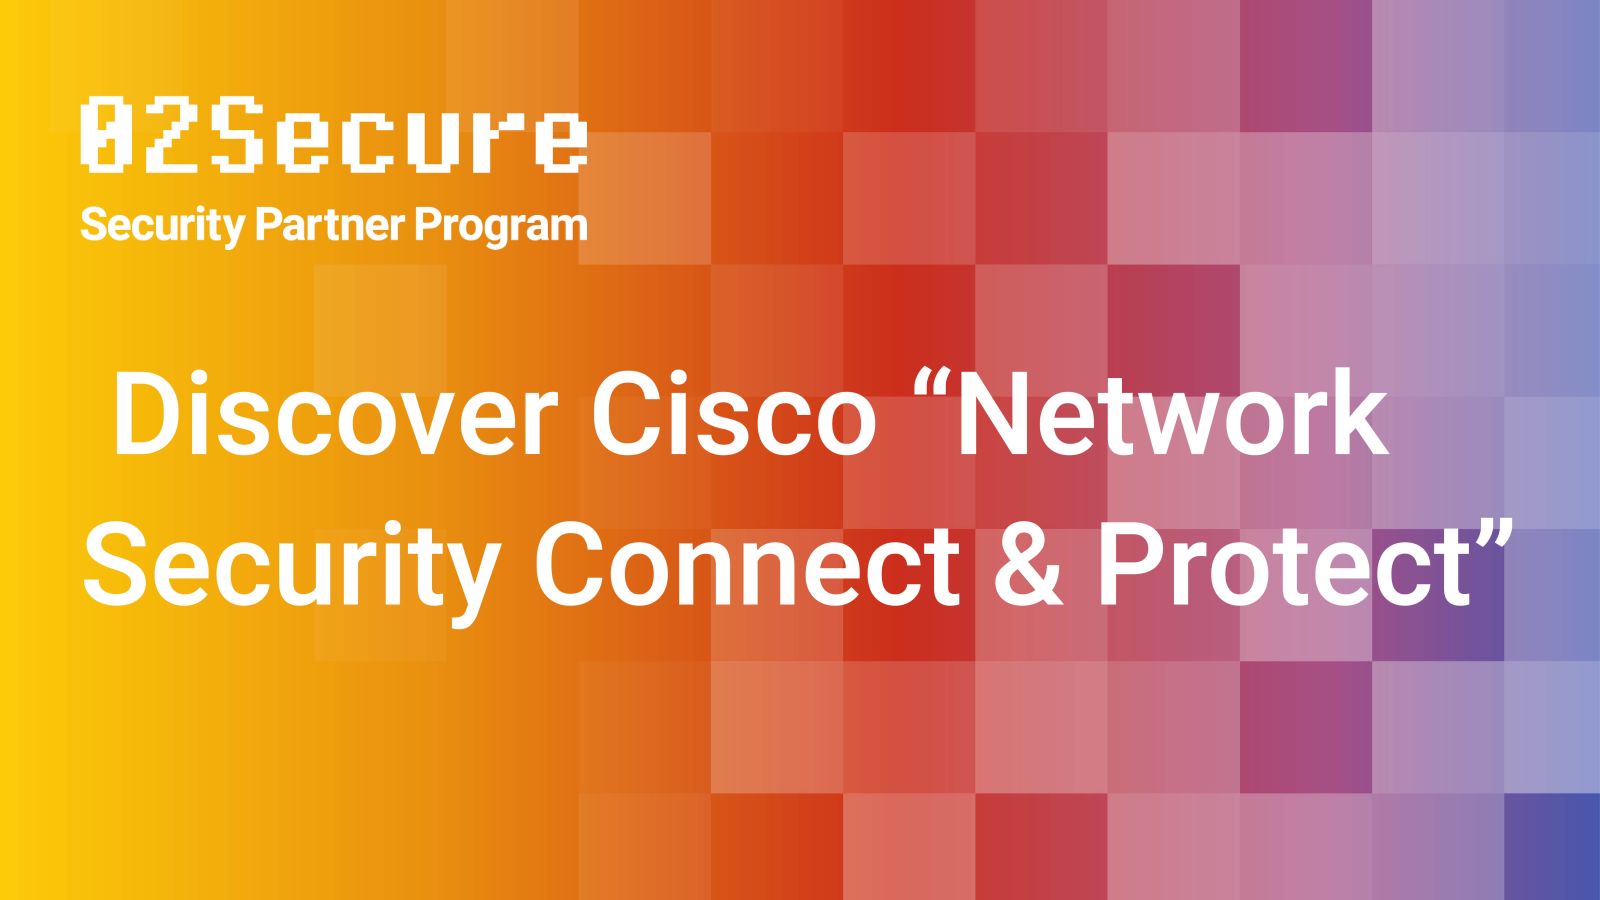 02Secure -  Discover Cisco "Network Security Connect & Protect" Featured Image